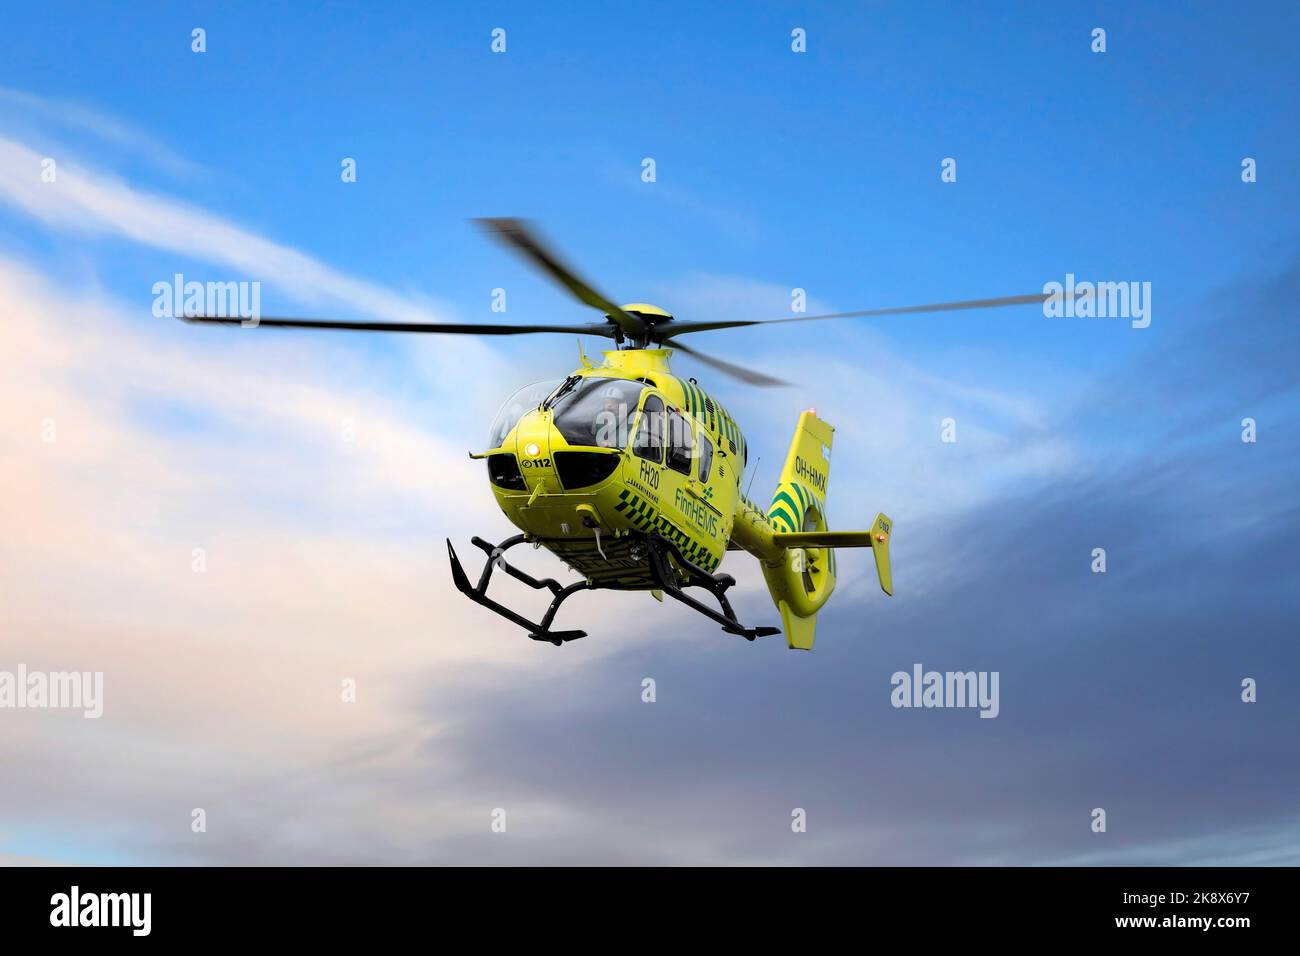 FinnHEMS, Finnish Helicopter Emergency Medical Services, medical helicopter takes off against blue sky and clouds. Stock Photo